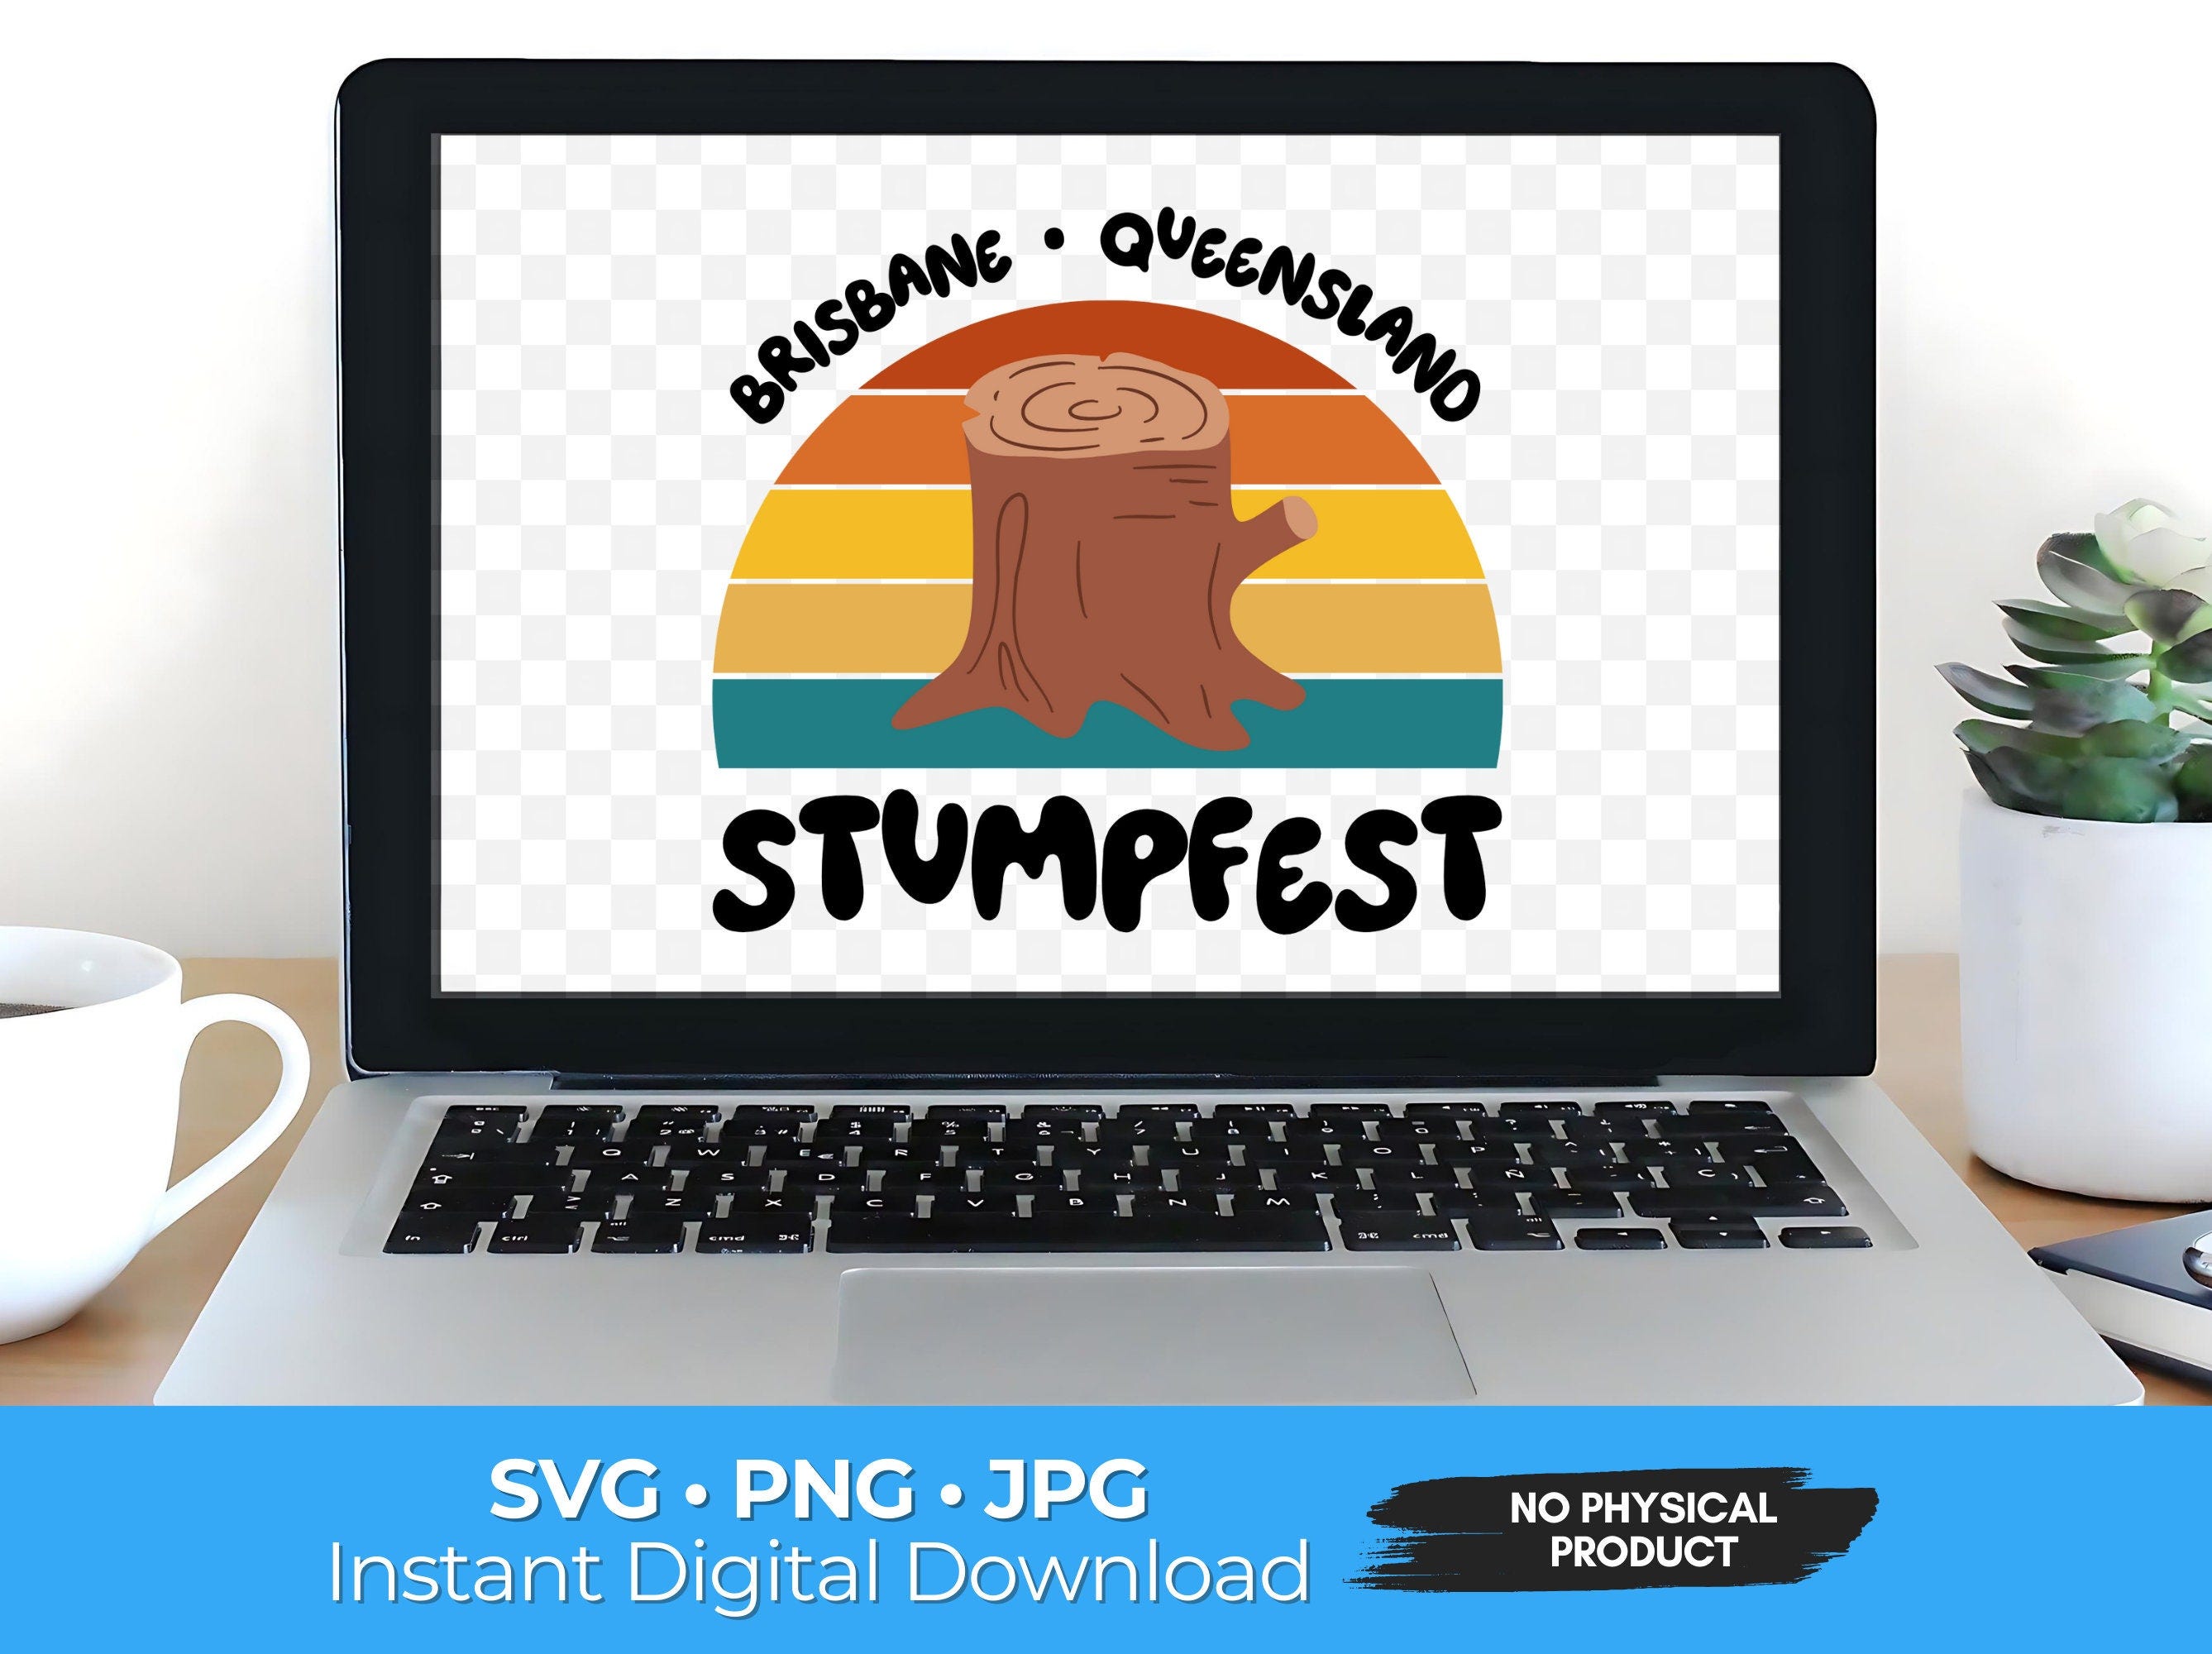 Bluey Stumpfest SVG PNG JPG Digital Downloads for T-Shirts, Bags, Tumblers & More + 10% Goes to Charity!